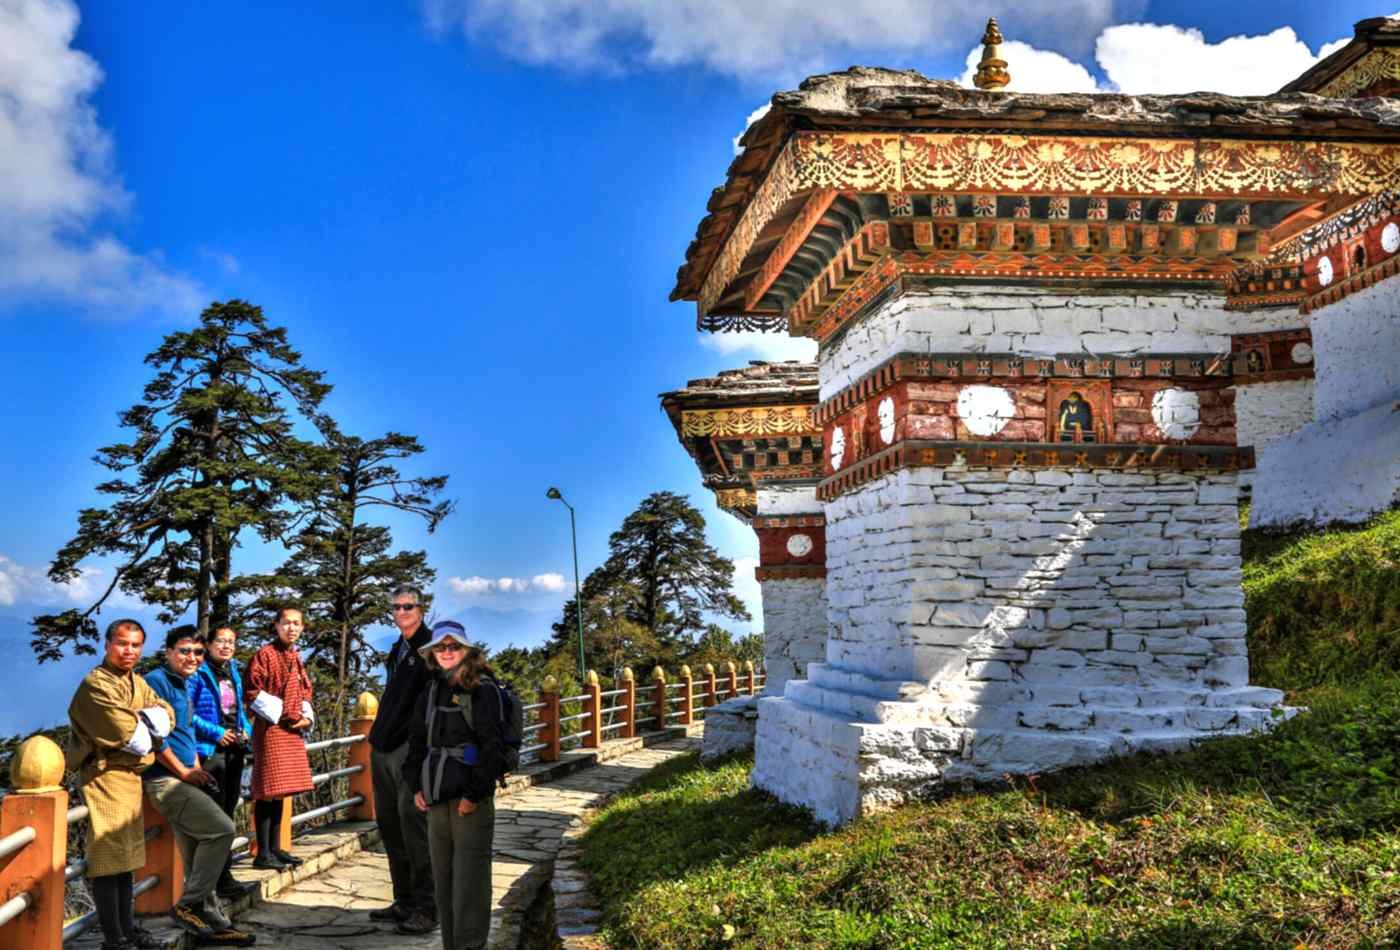 Tourist standing alongside the monuments at Dochu-La Pass in Bhutan, surrounded by the beautiful mountain scenery.